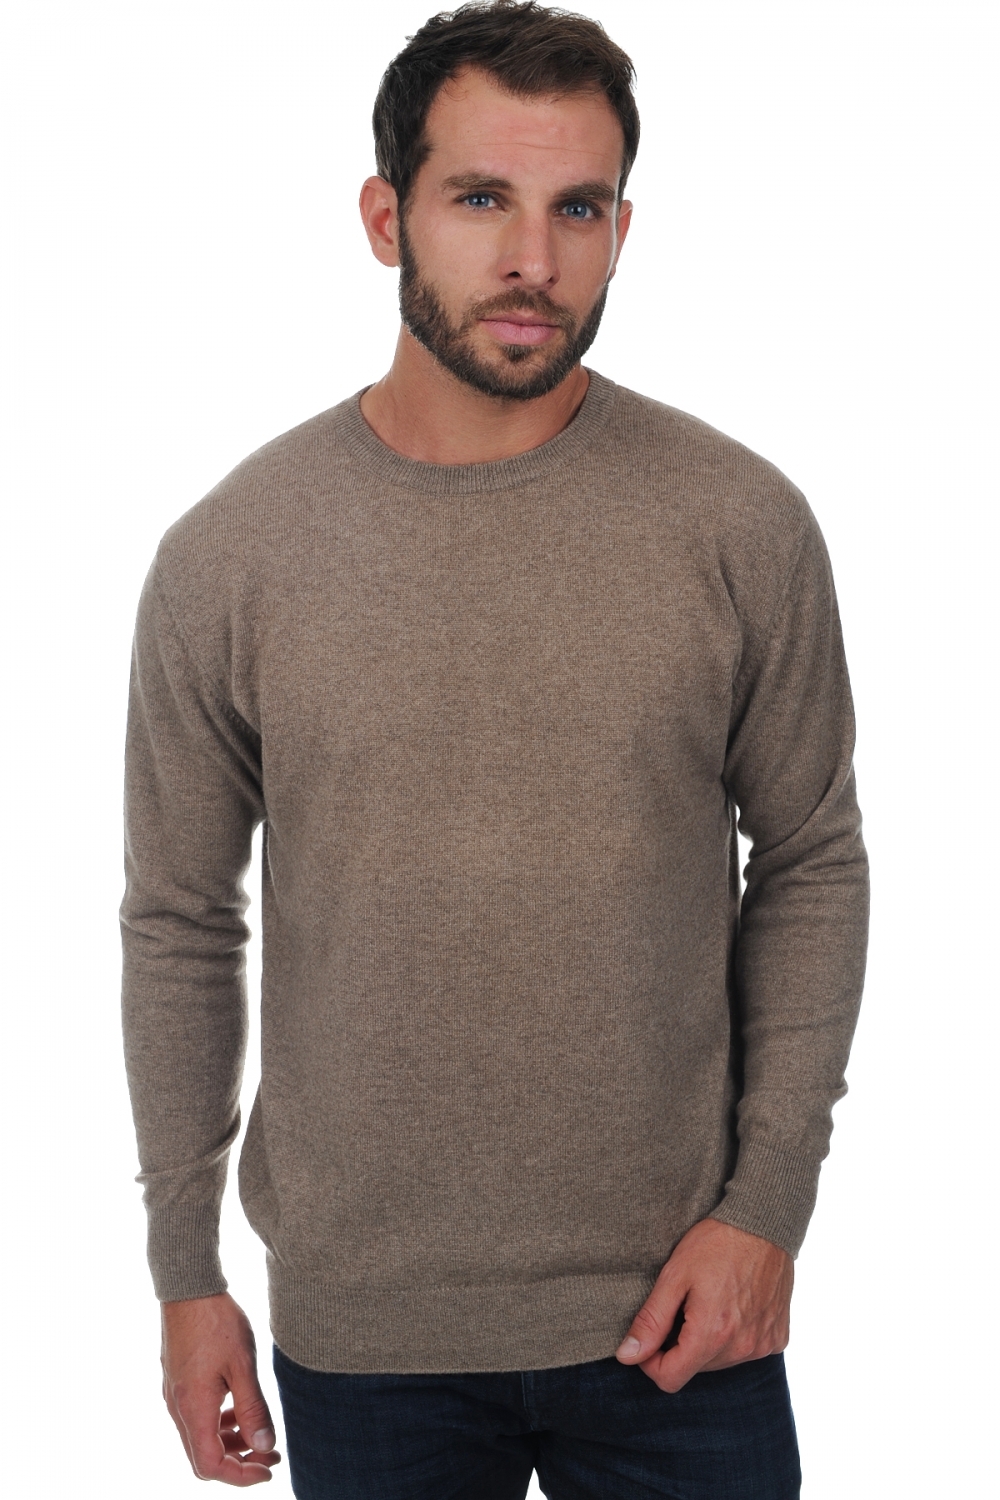 Cachemire pull homme nestor natural brown 3xl